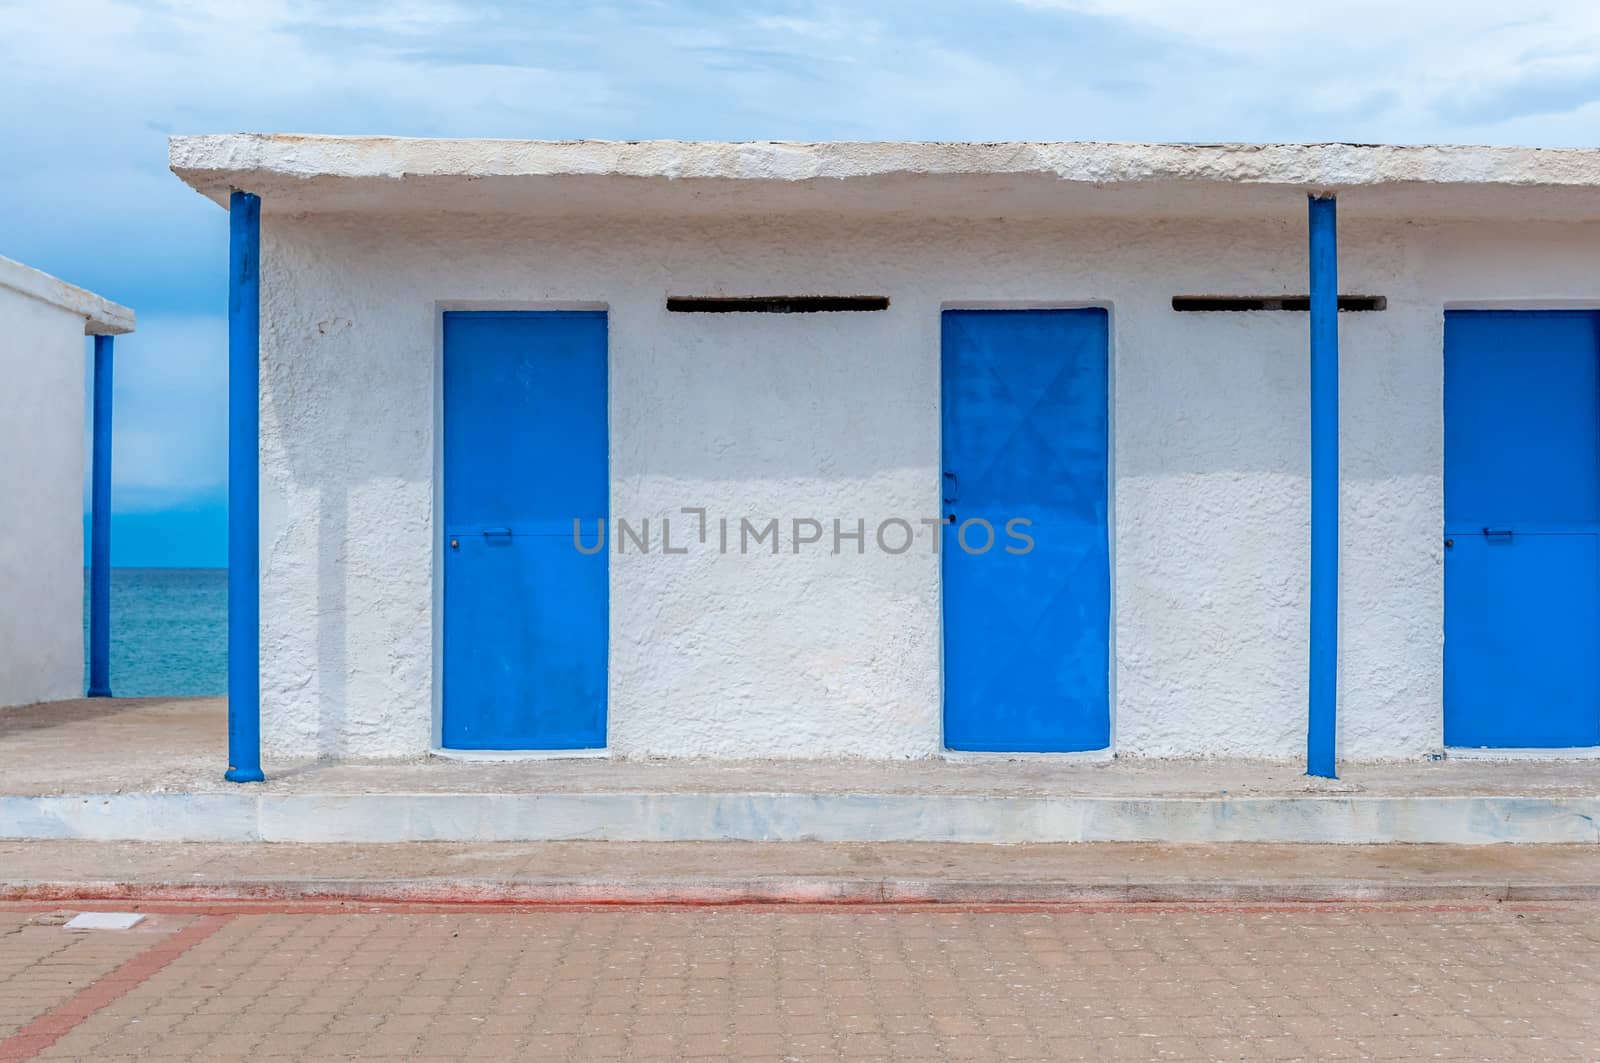 White and blue building on the beach in a cloudy day of autumn - Platamona - Sardinia - Italy